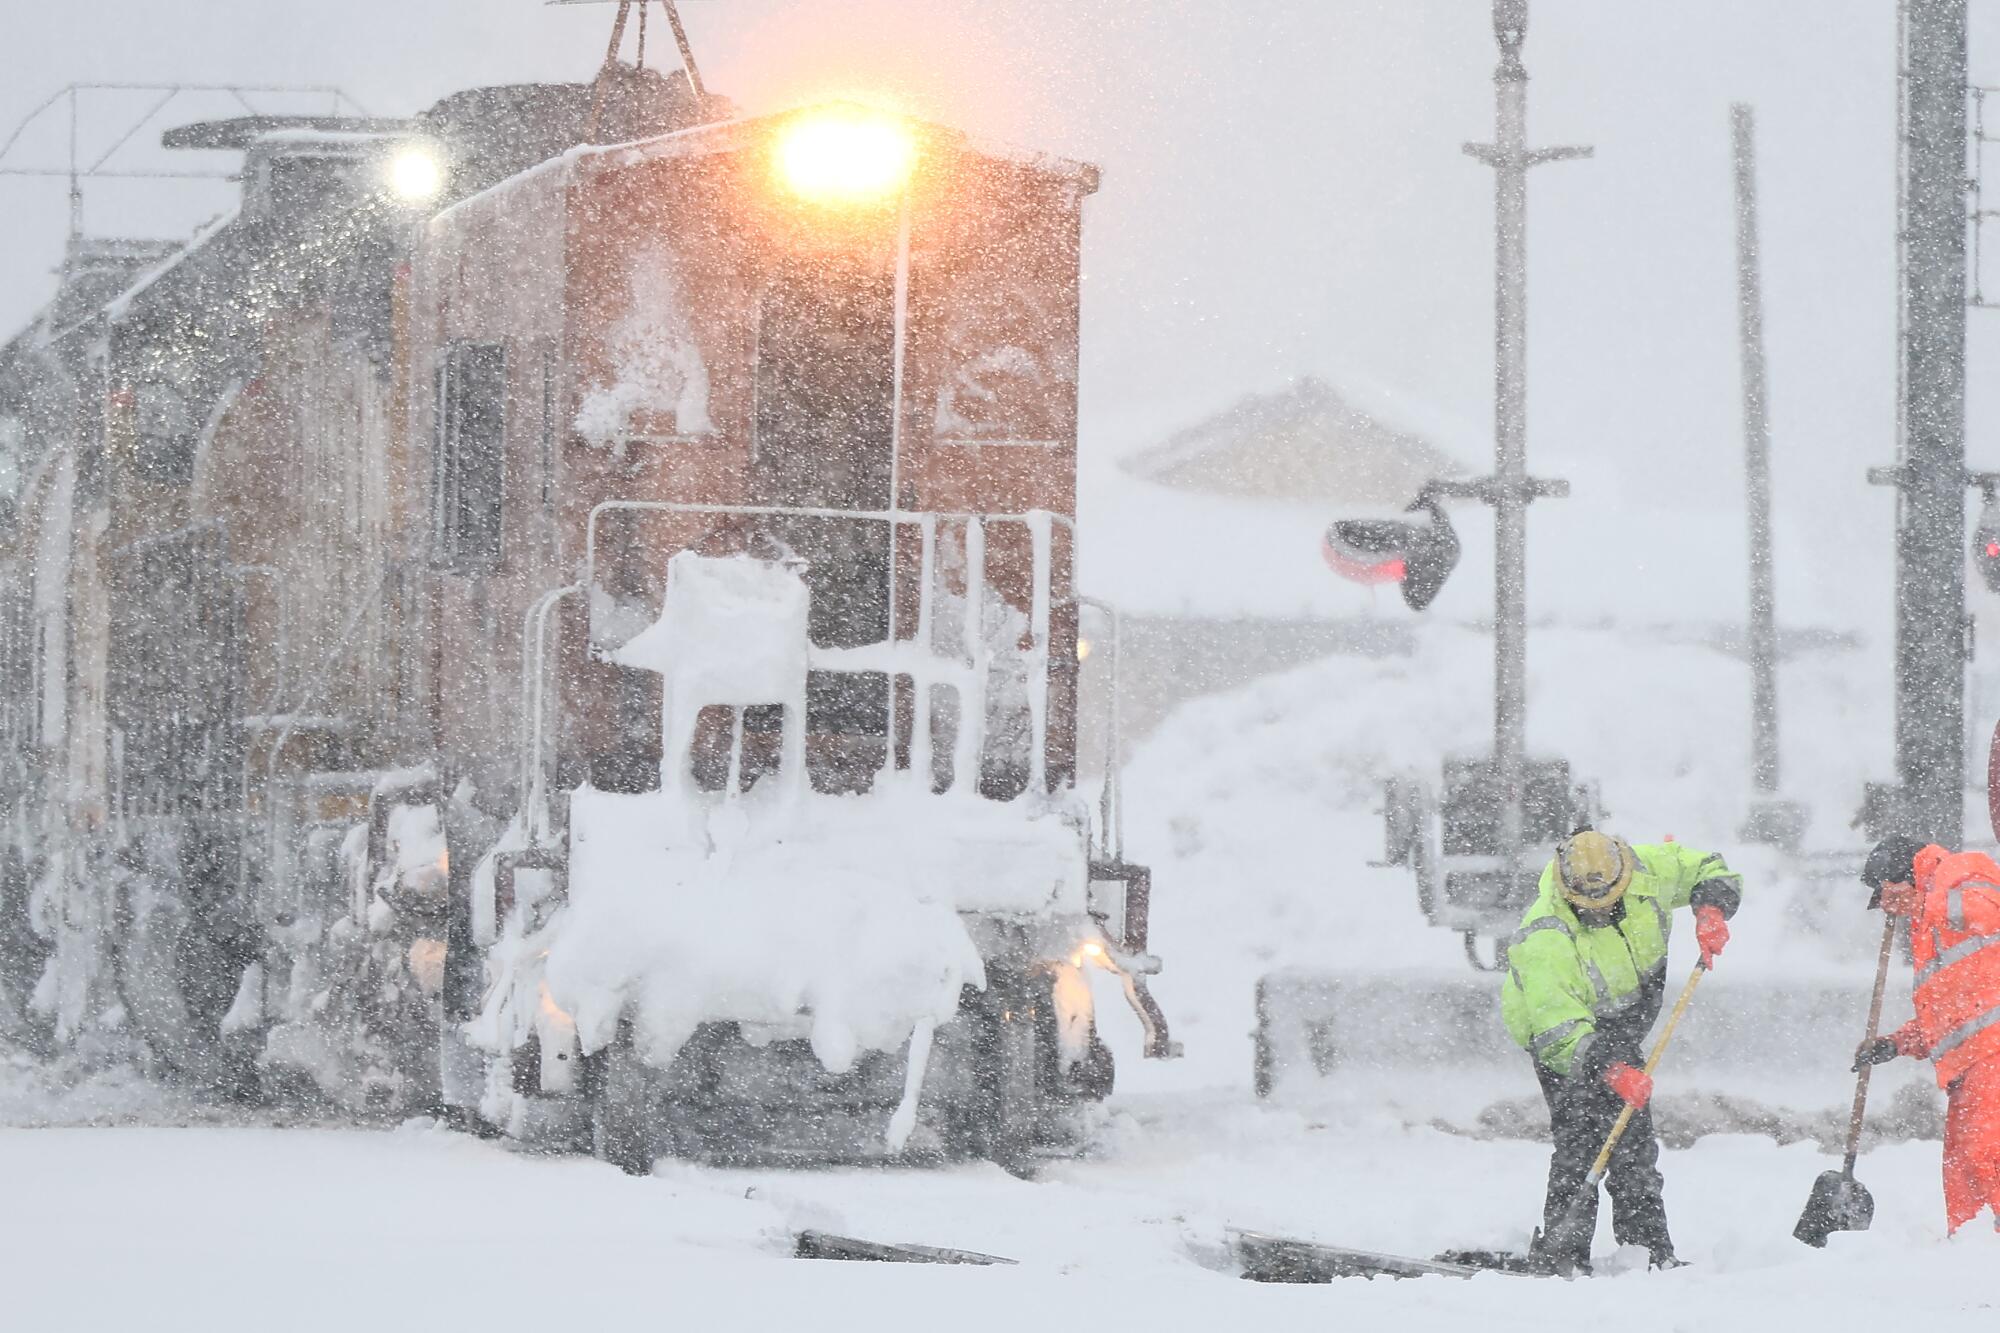 2 dead after shoveling heavy snow as winter storm batters Upstate New York